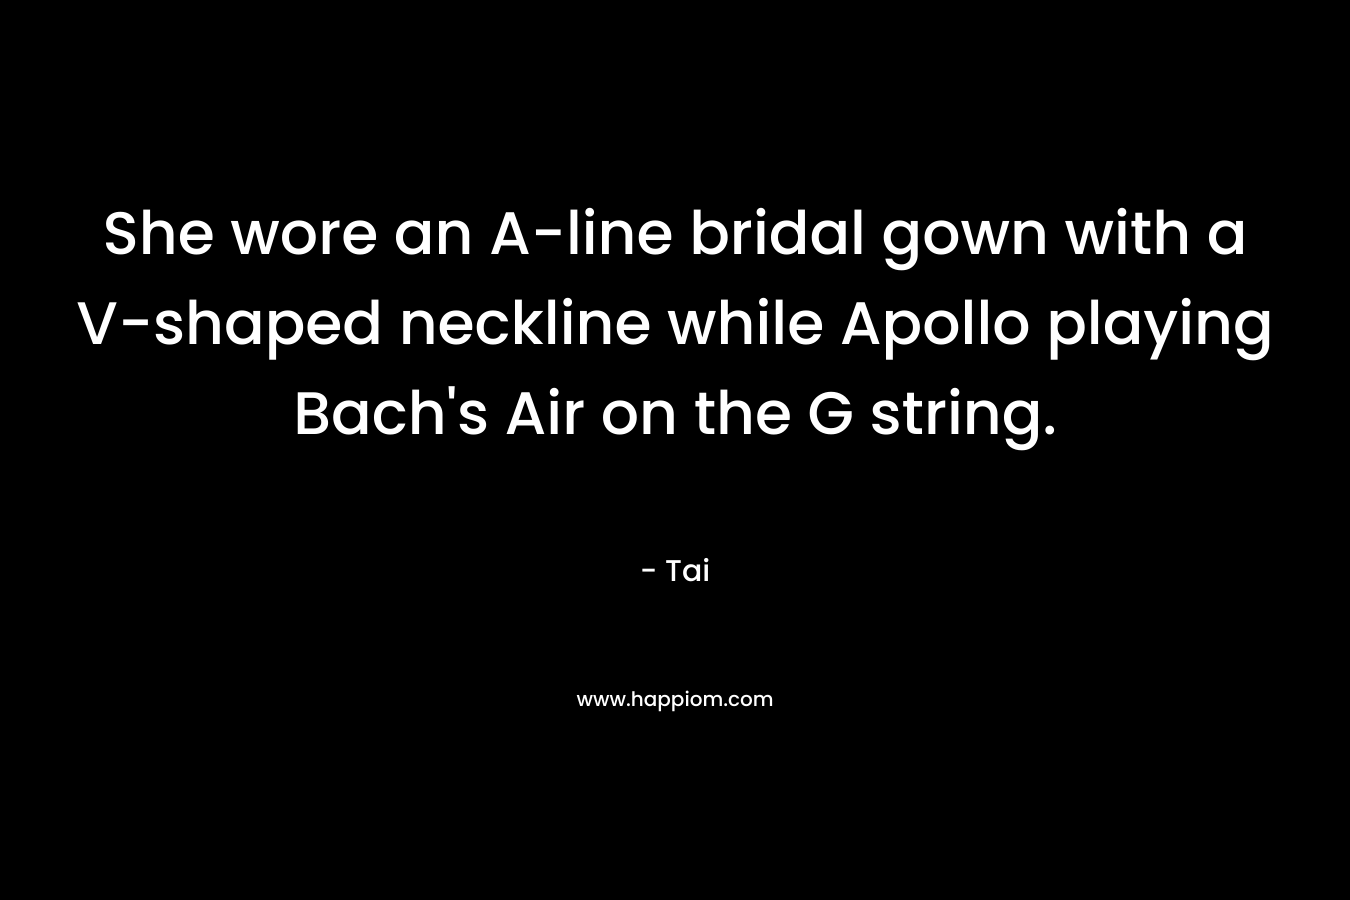 She wore an A-line bridal gown with a V-shaped neckline while Apollo playing Bach’s Air on the G string. – Tai